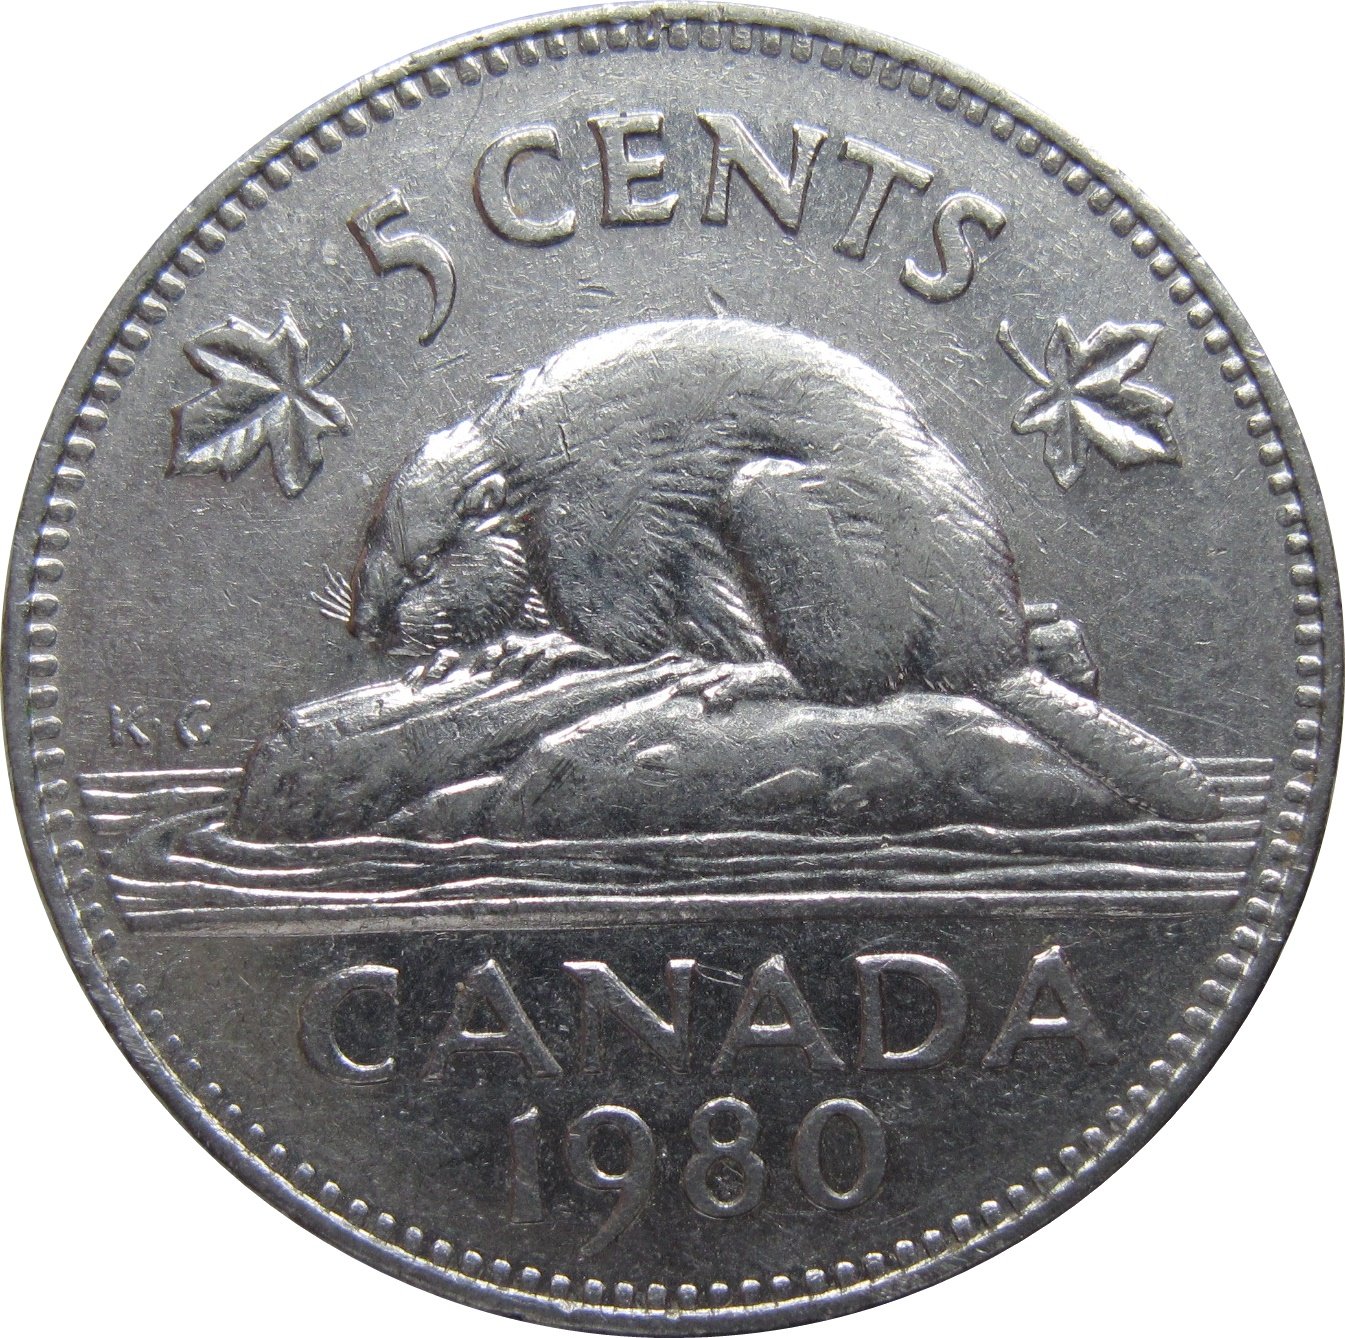 1980 Canadian 5 Cent